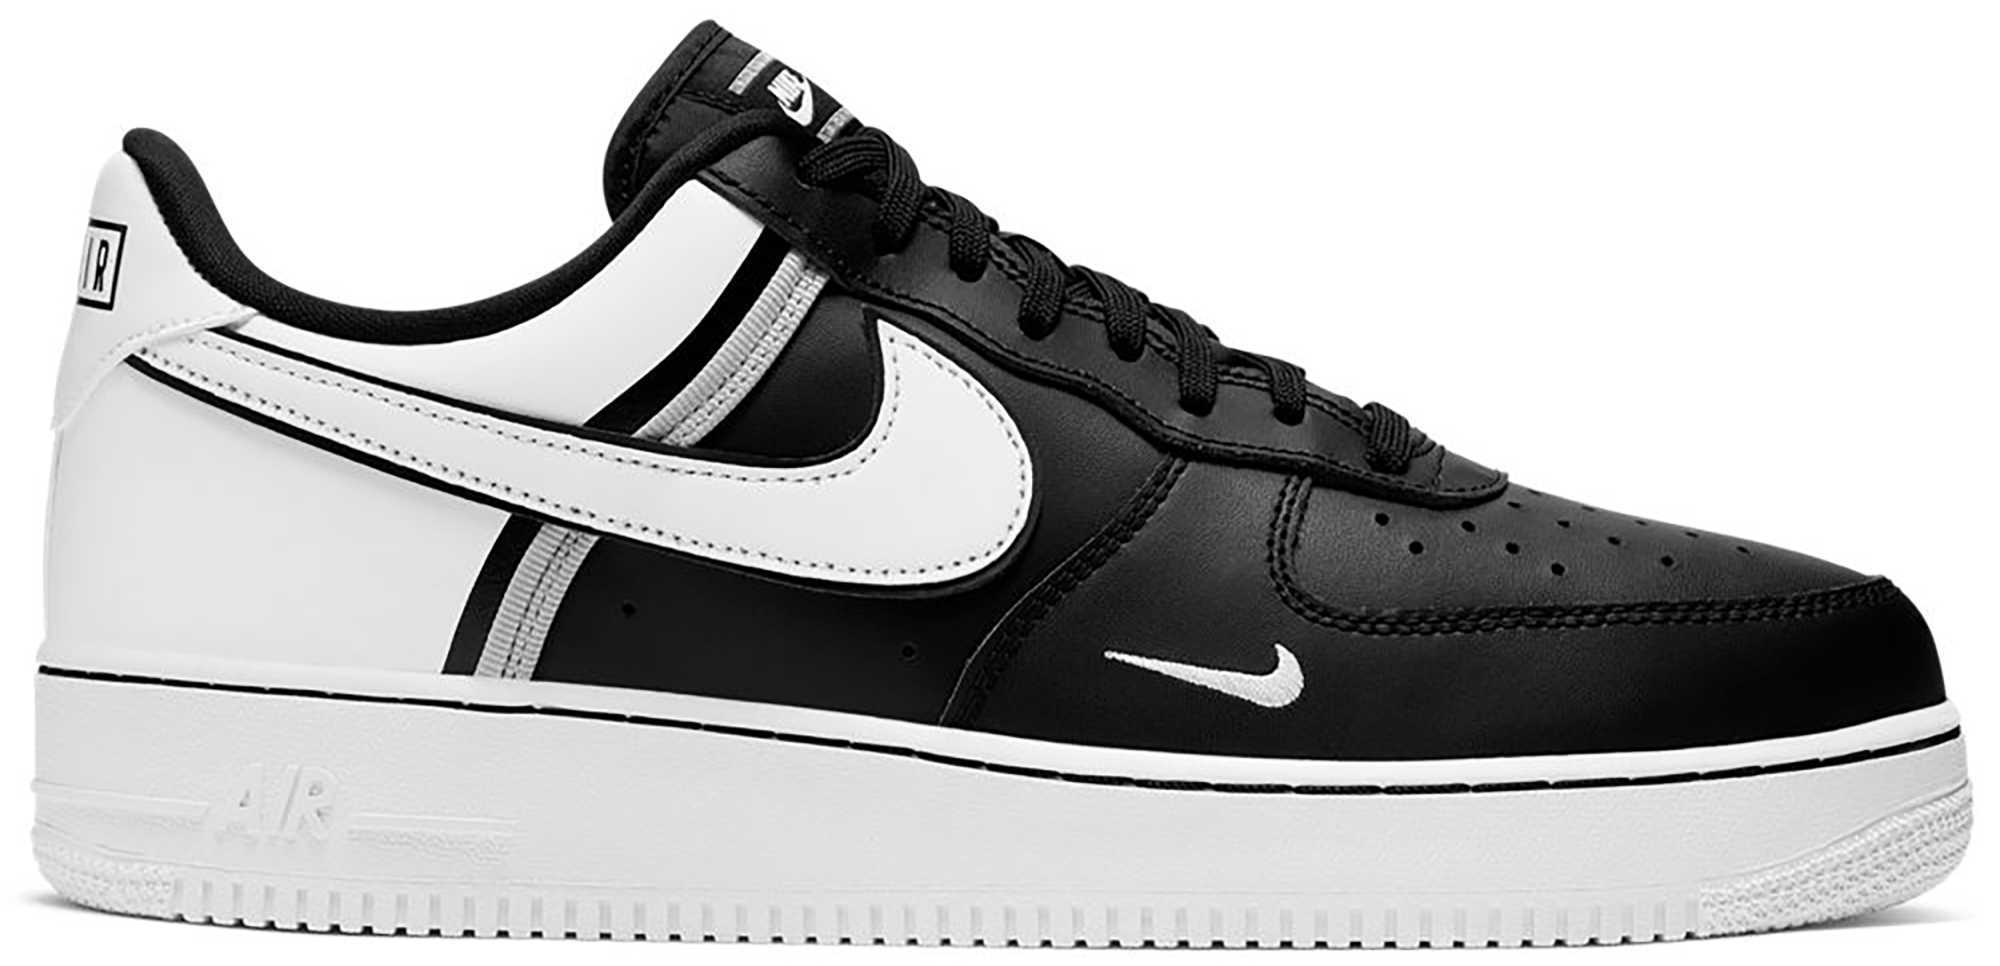 air force 1 black and white lv8